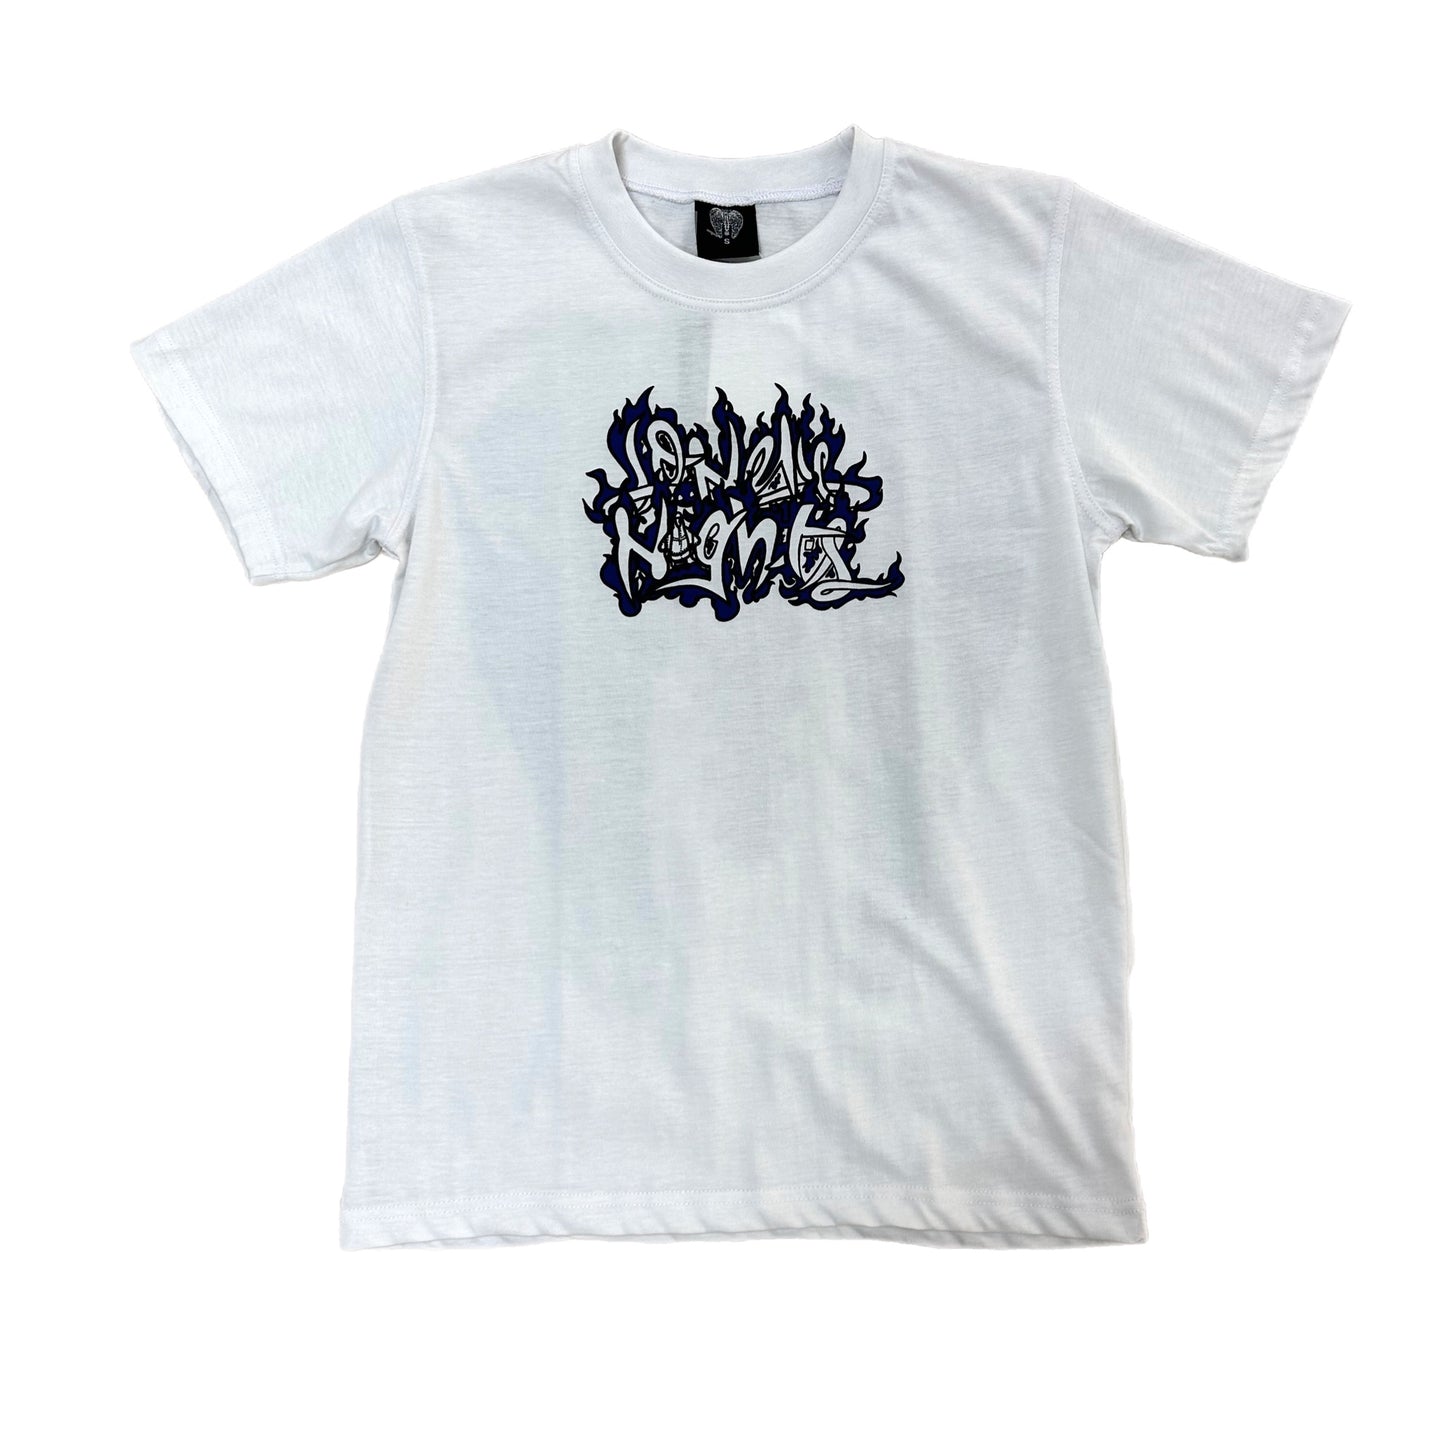 LONELY NIGHTS FLAME LOGO TEE WHITE/BLUE